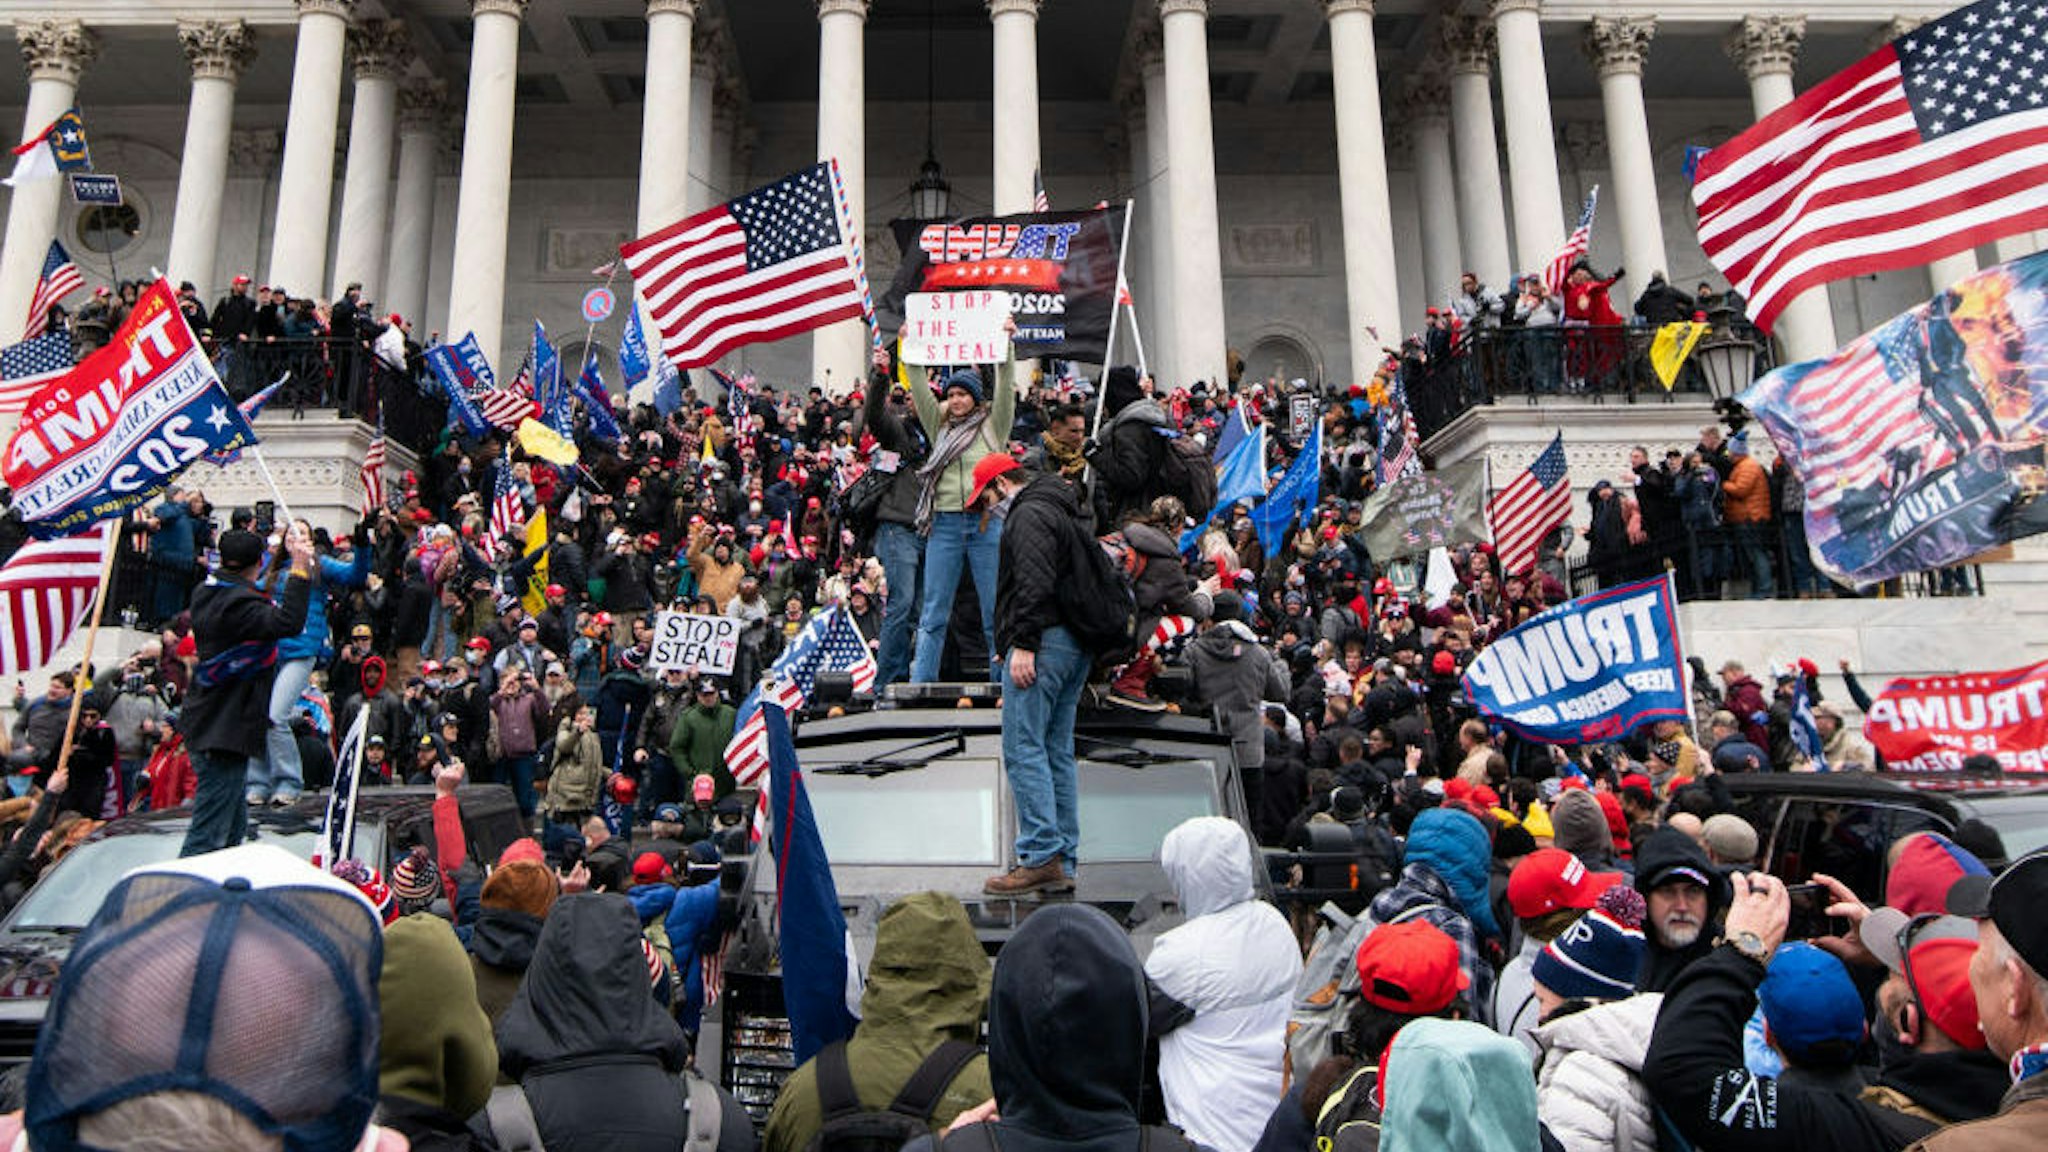 UNITED STATES - JANUARY 6: Trump flags fly as rioters take over the steps of the Capitol on the East Front on Wednesday, Jan. 6, 2021, as the Congress works to certify the electoral college votes. (Photo By Bill Clark/CQ-Roll Call, Inc via Getty Images)